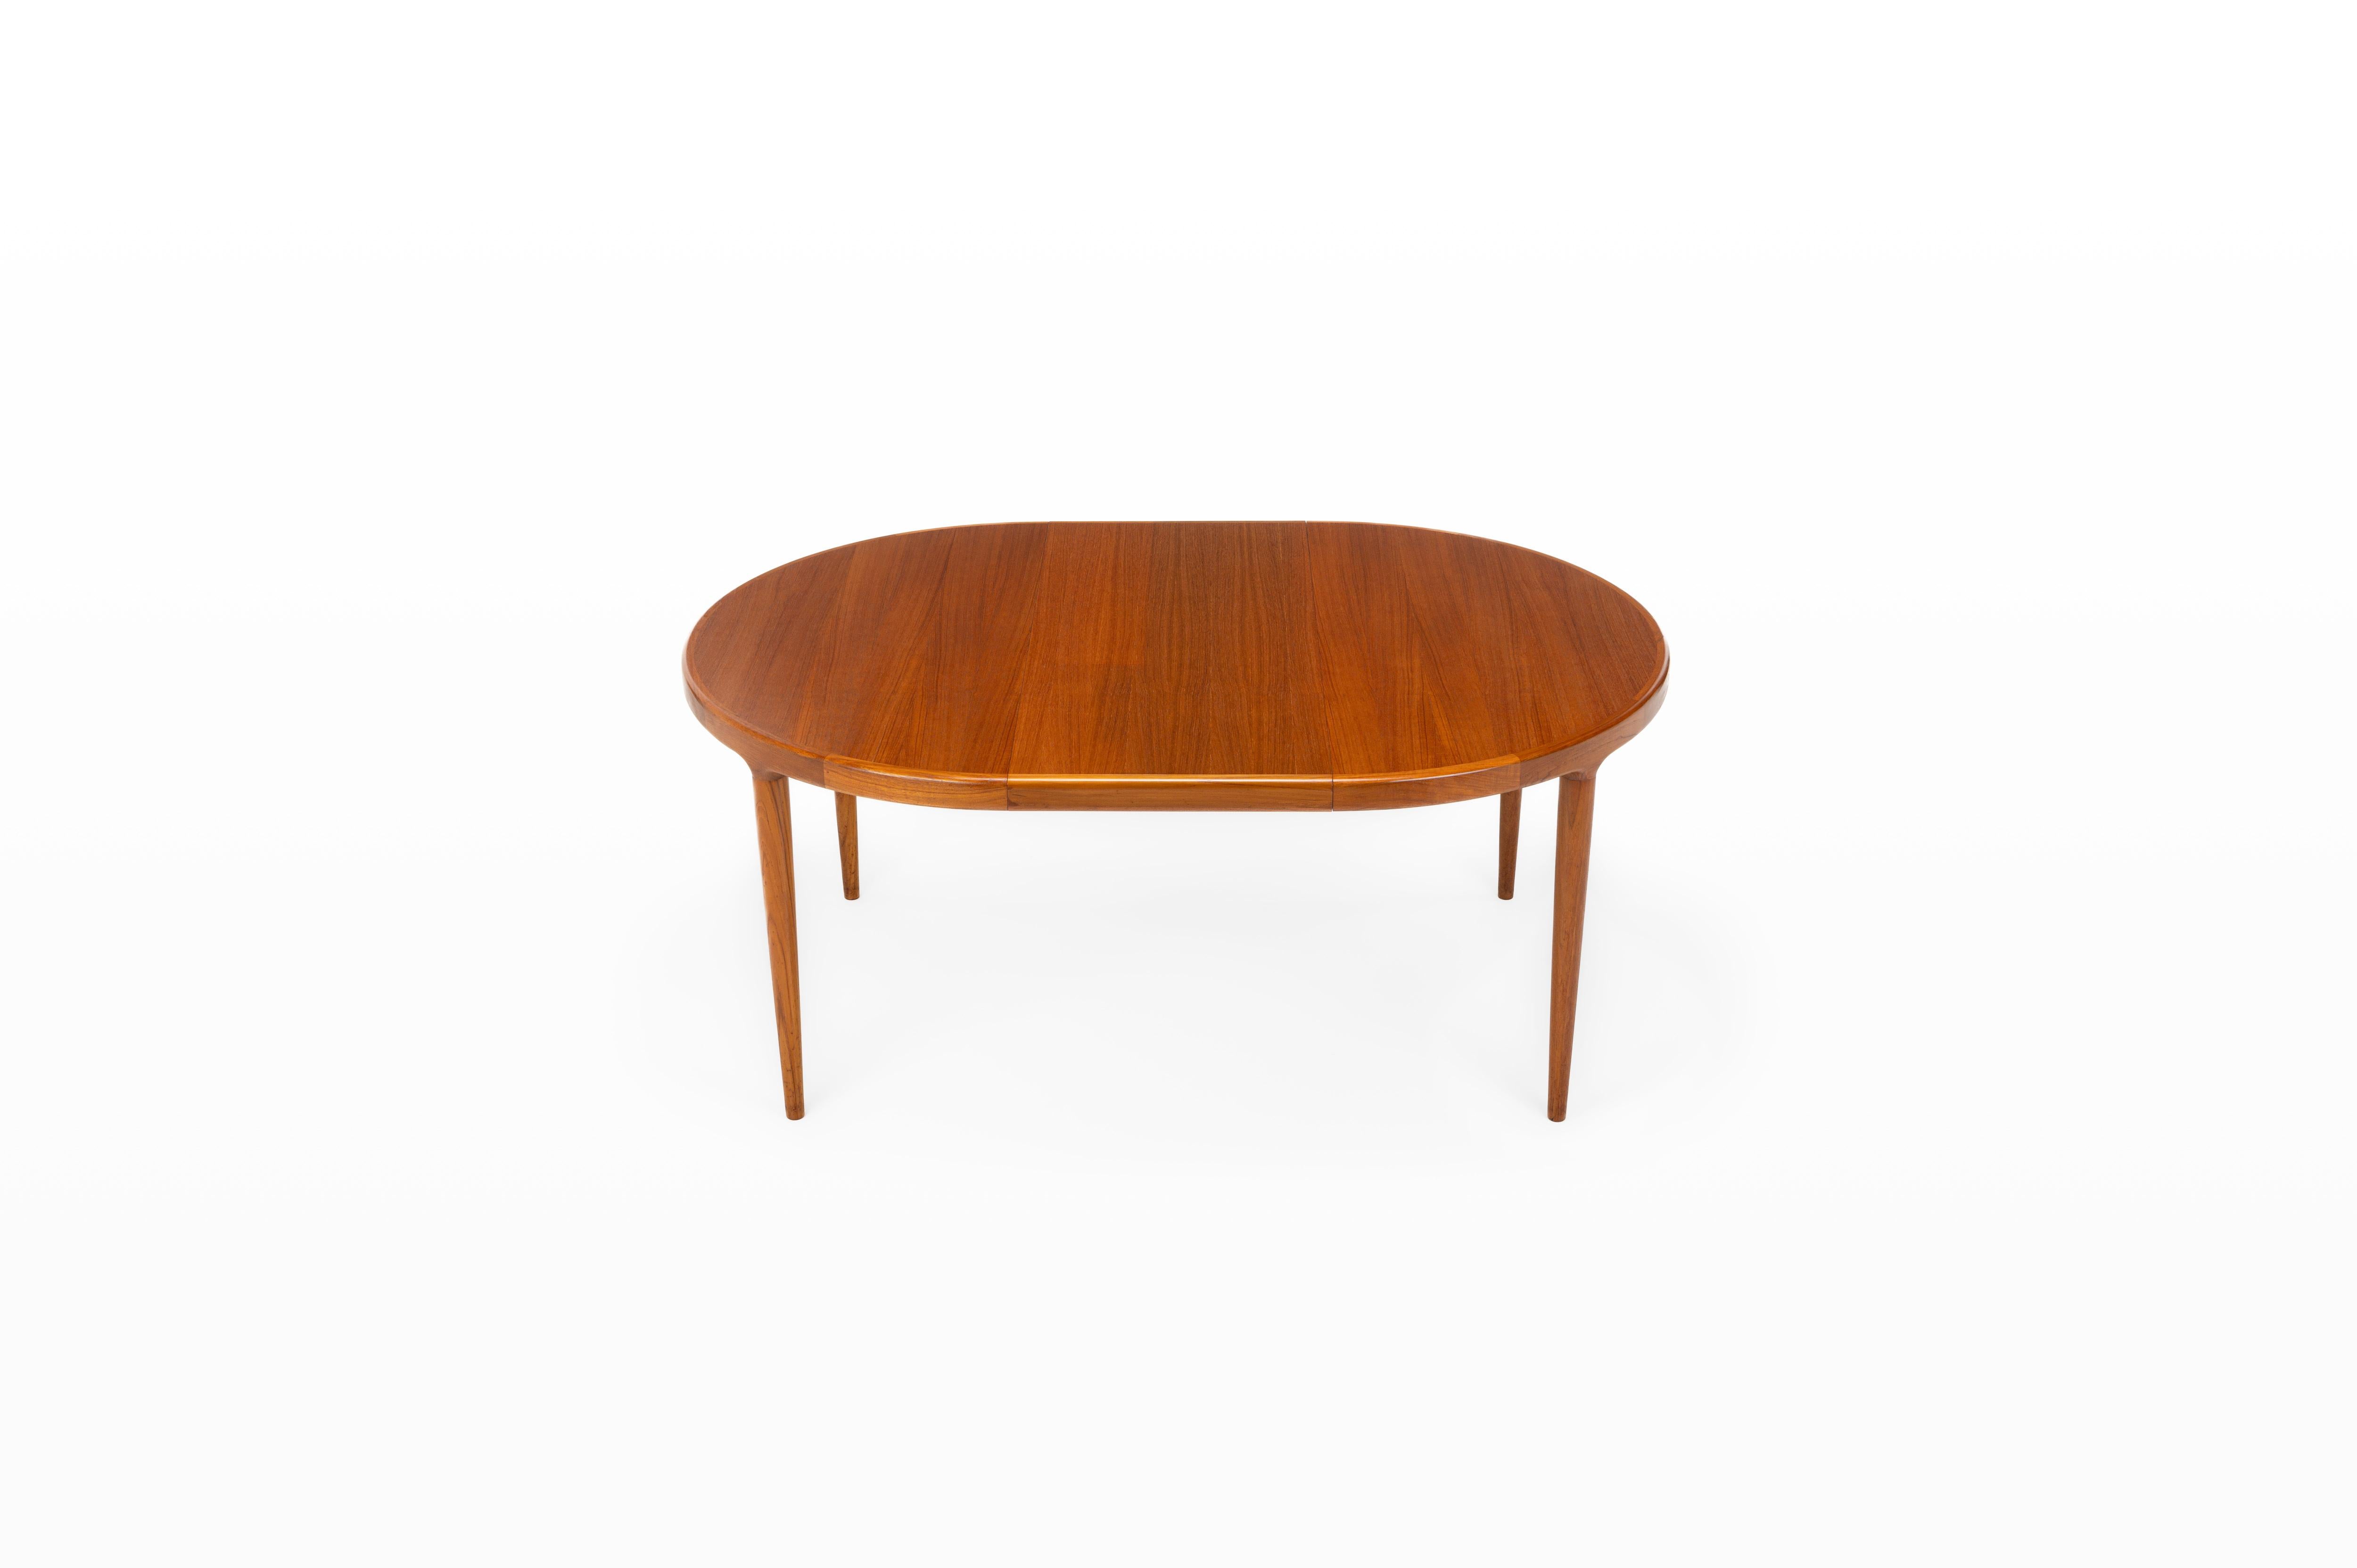 Stunning Scandinavian round dining table by Harry Østergaard for Randers Møbelfabrik. Made in Denmark in the 1960s, this extendable table is in great condition.

Dimensions:
W: 120 - 170 - 220 cm
D: 120 cm
H: 73 cm